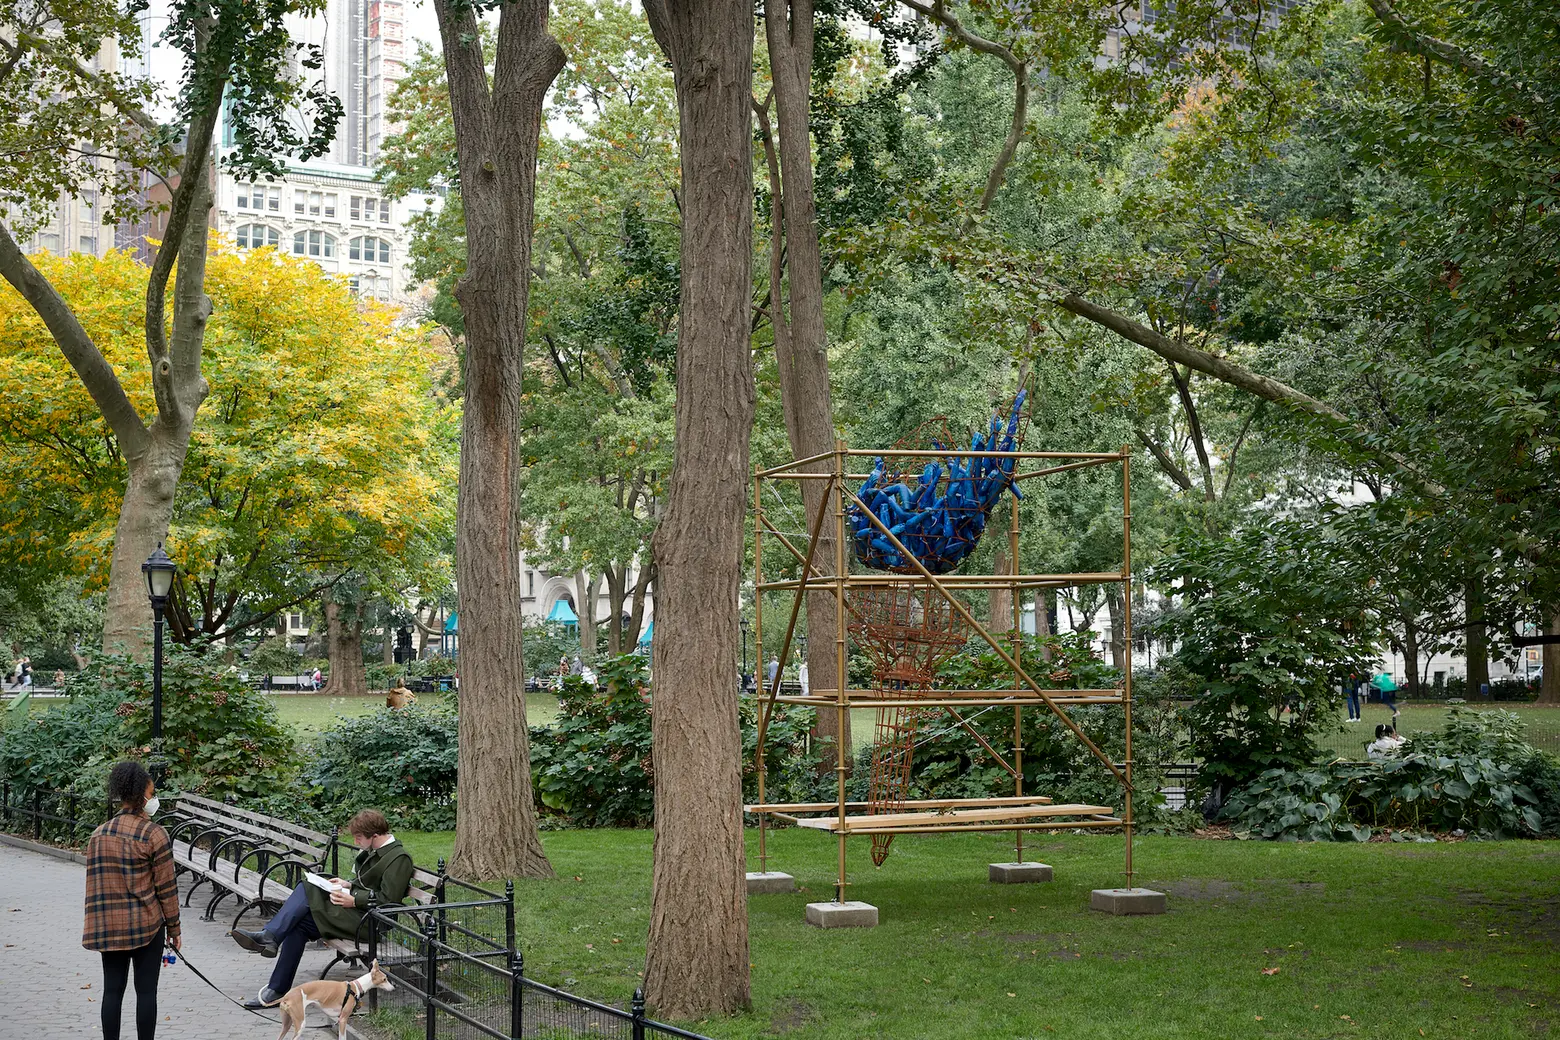 New sculpture in Madison Square Park uses Lady Liberty’s torch to symbolize city’s struggles